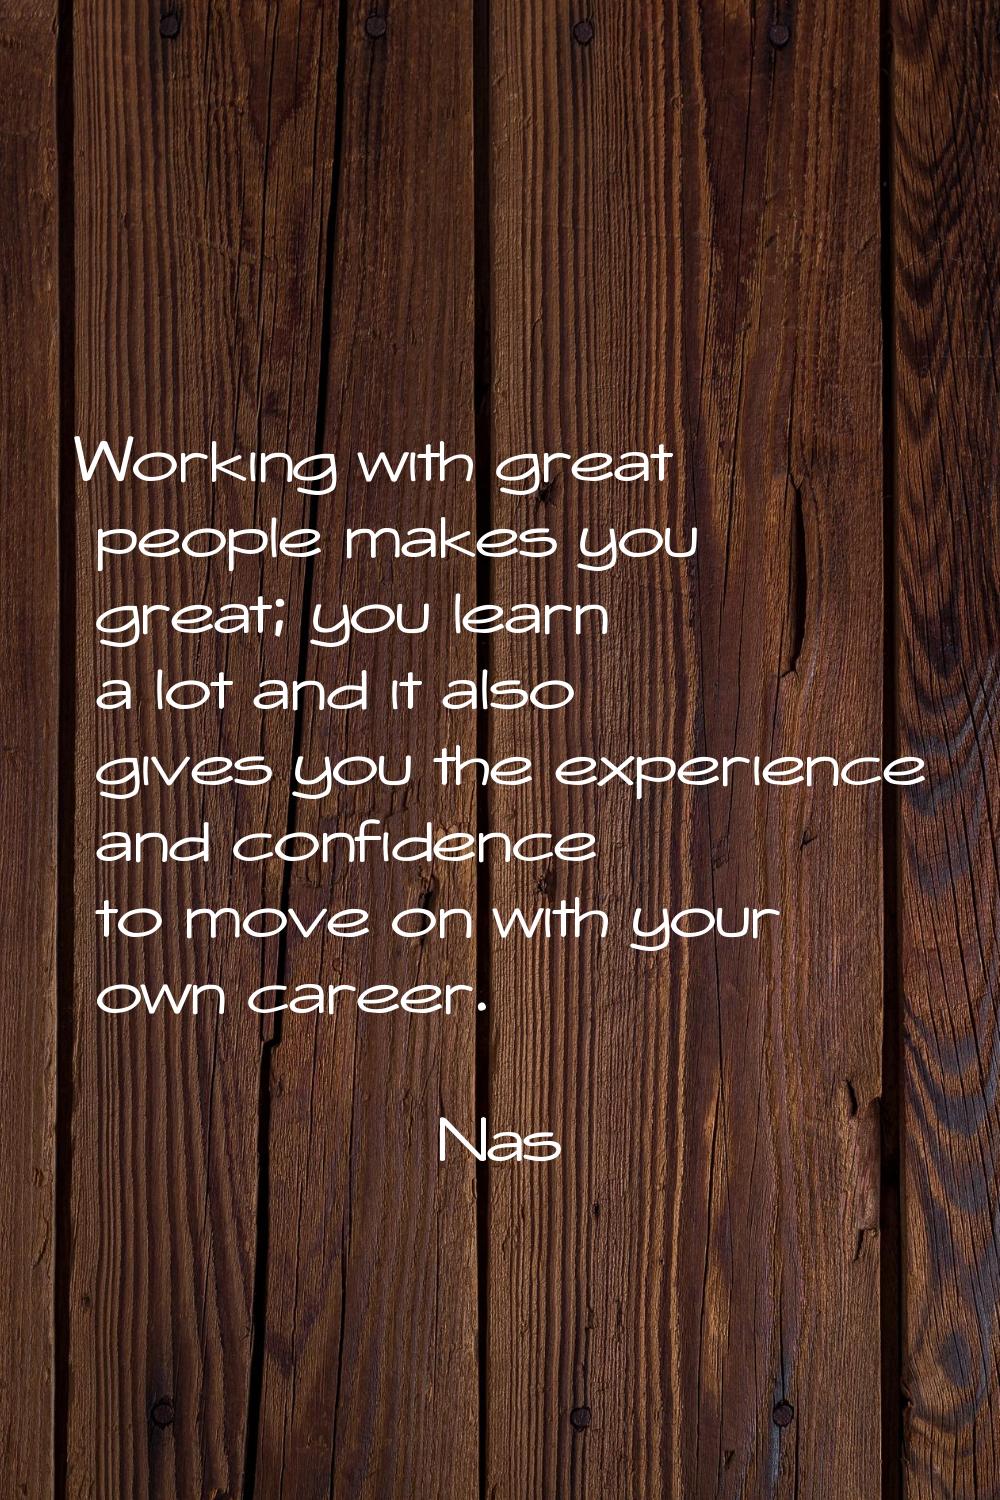 Working with great people makes you great; you learn a lot and it also gives you the experience and